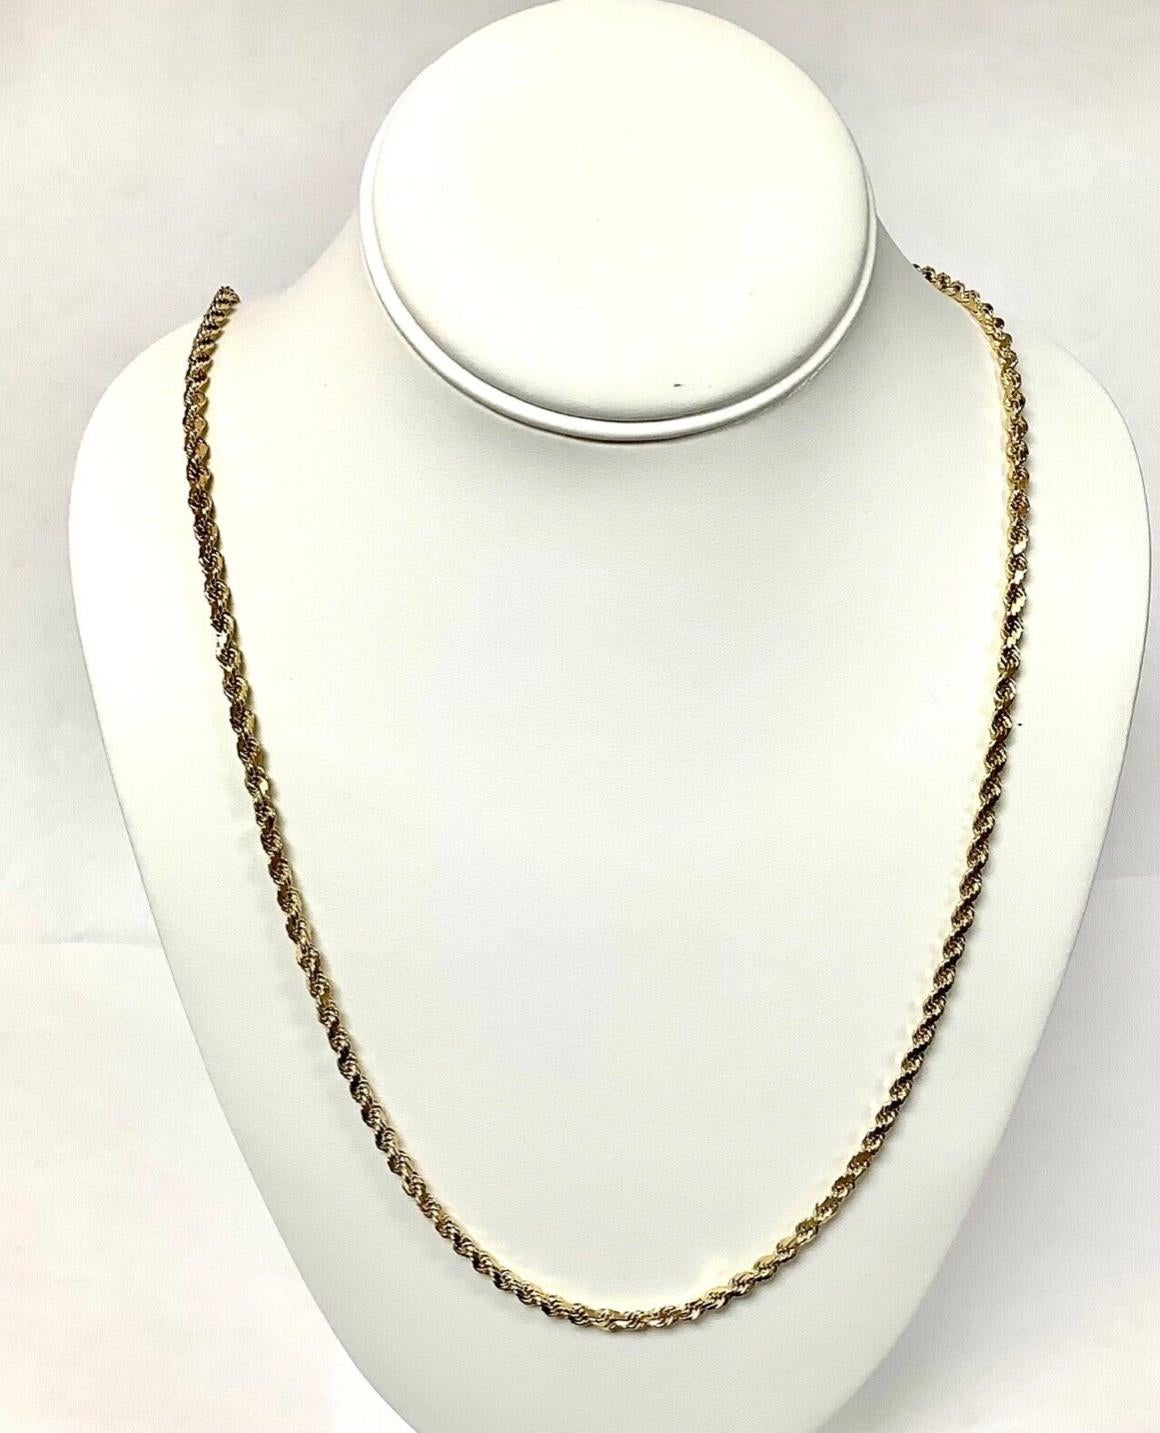 14k gold rope chain necklace. The necklace measures 30 inches. Secure barrel clasp. It is marked 14k and it weighs 39.04 Grams. 